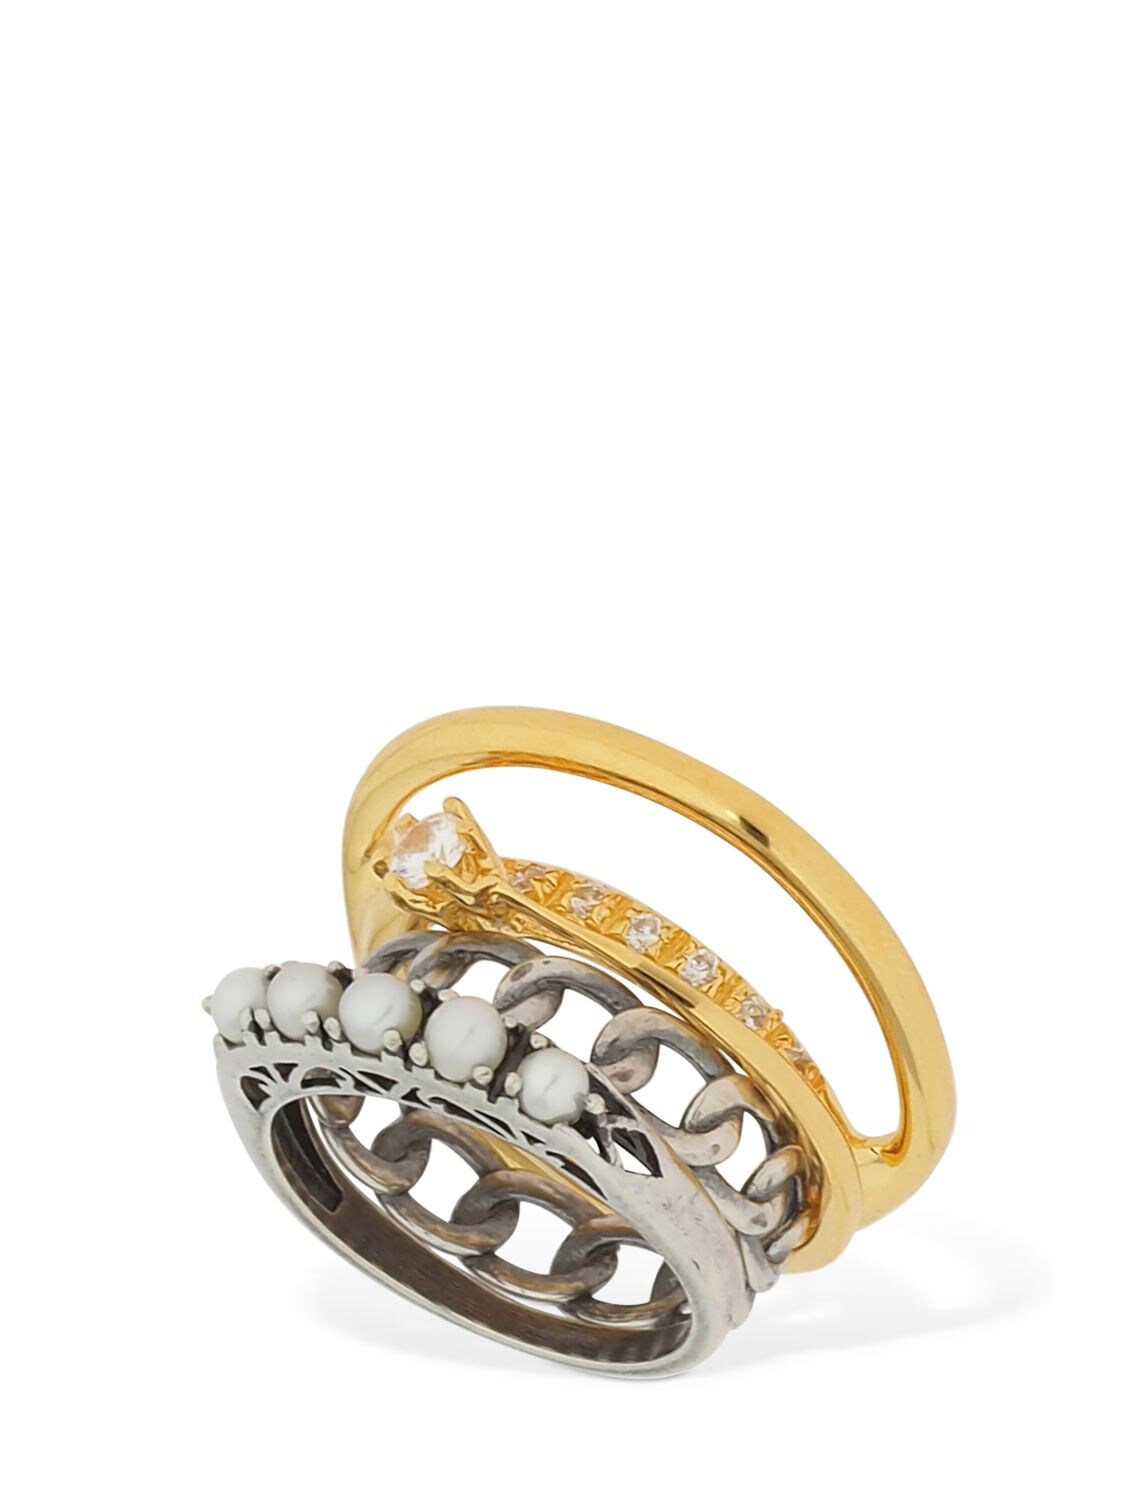 Iosselliani Set Of 4  Rings W/ Pearls & Crystals In Gold,silver